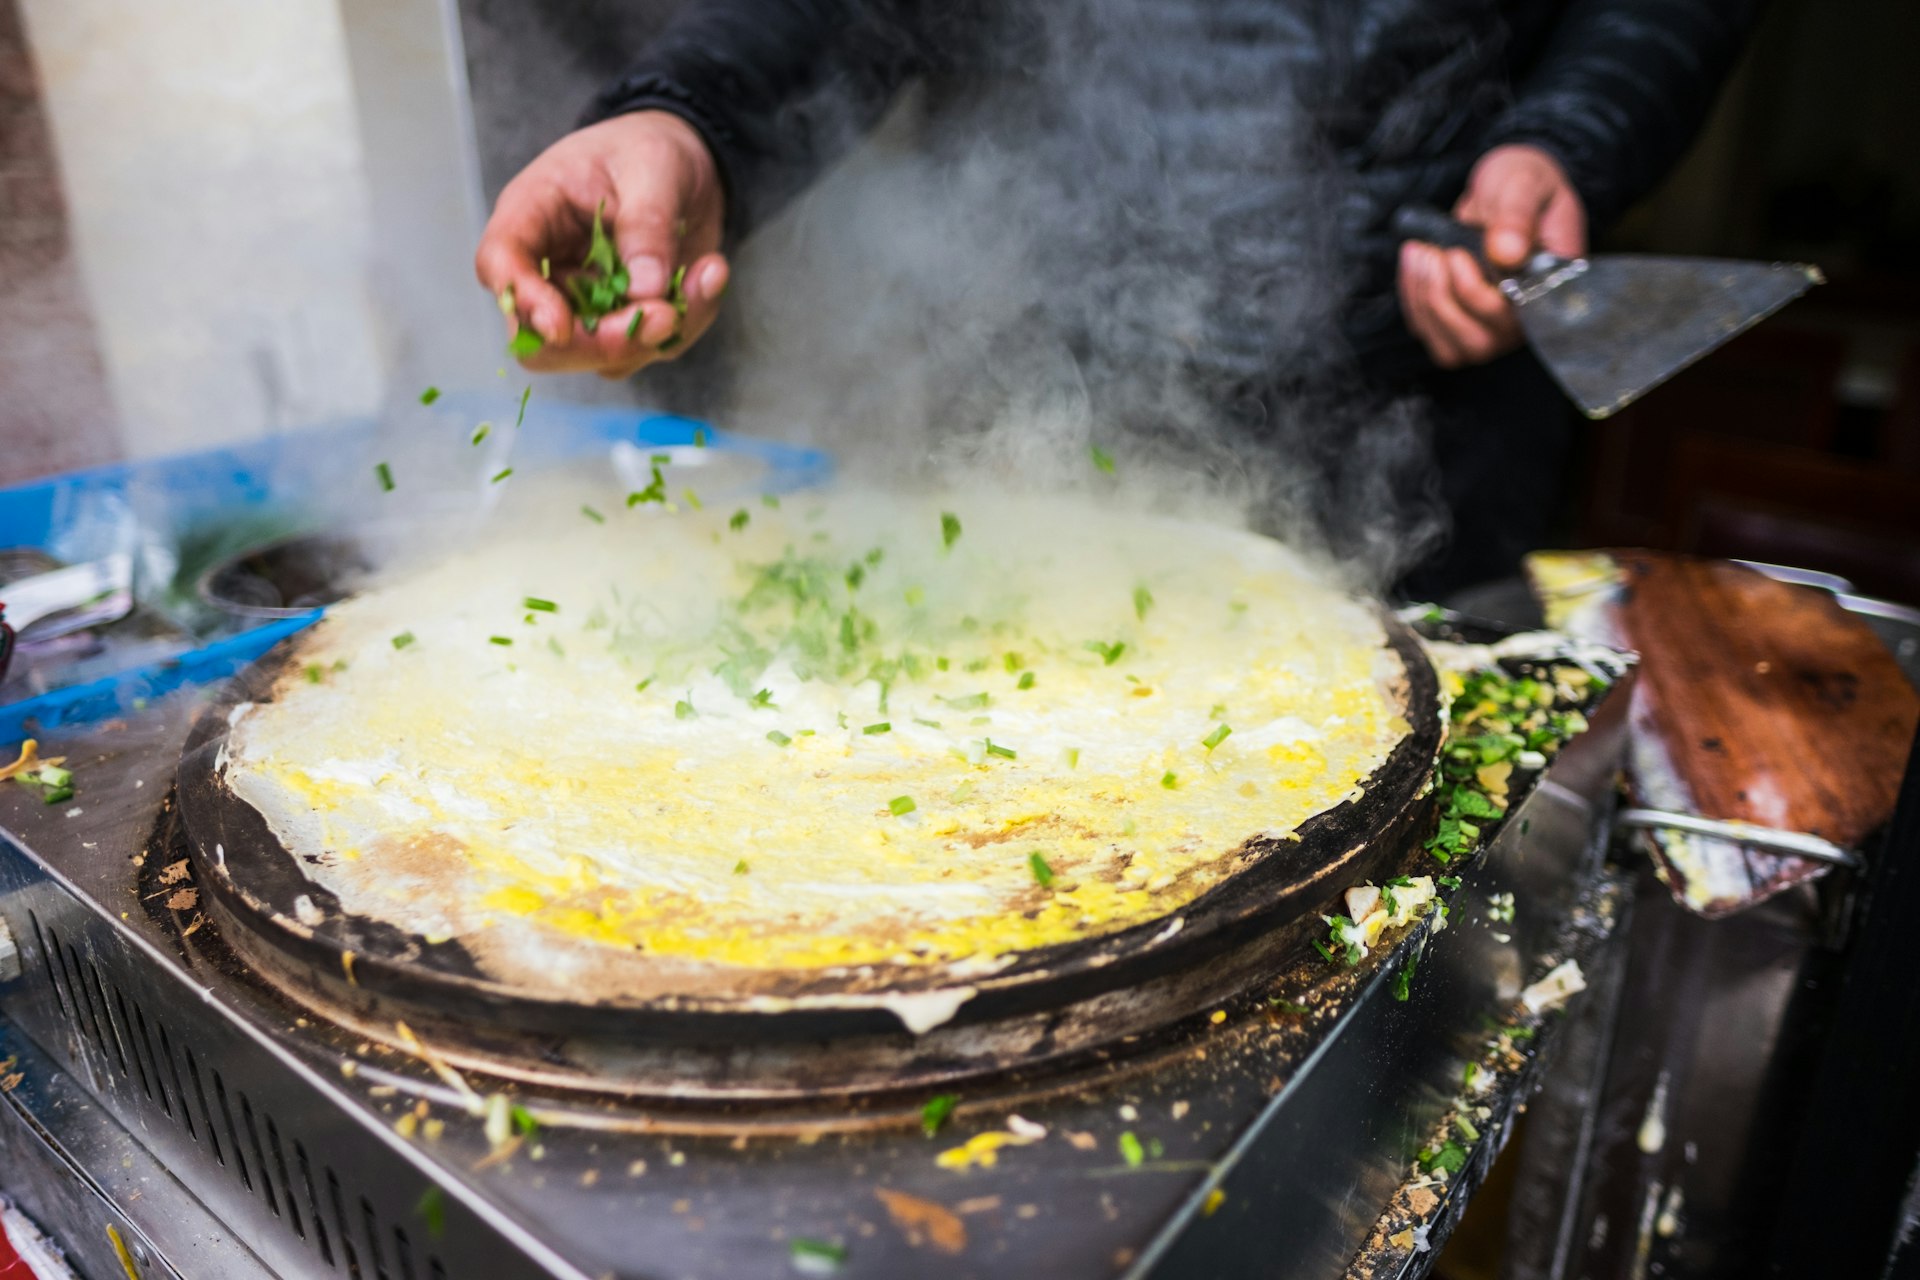 A street chef spreads scallions over batter on a griddle to make a savory jianbing